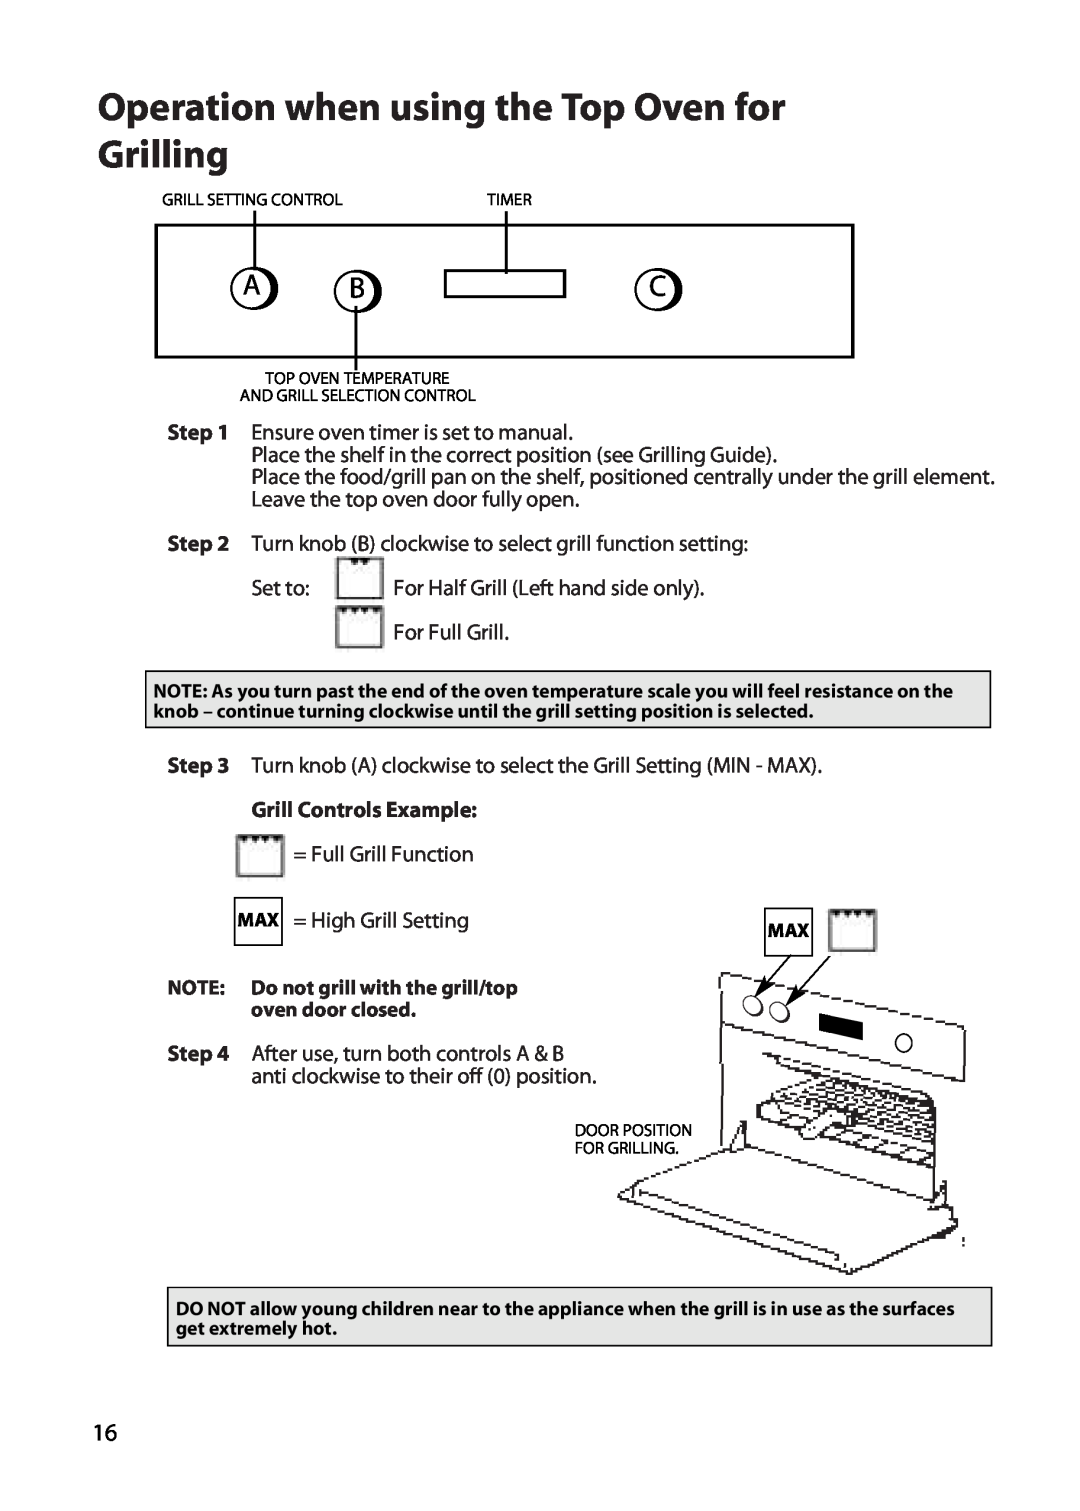 Hotpoint UT47, UD47 manual Operation when using the Top Oven for Grilling, Grill Controls Example, MAX = High Grill Setting 